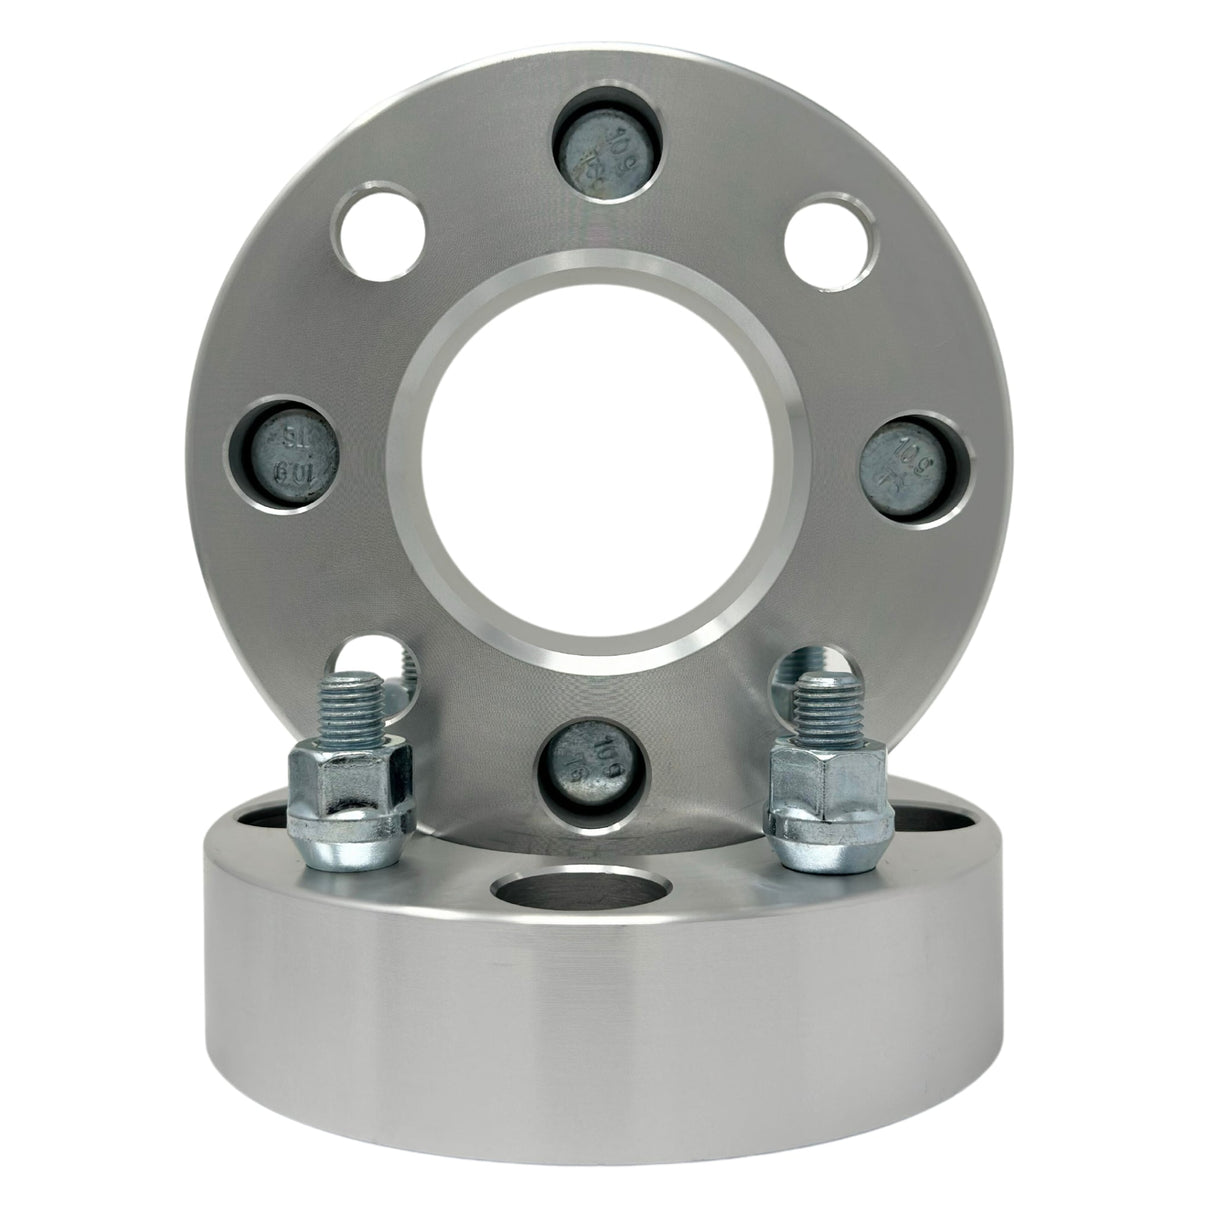 Cushman Truckster 4x3.75 To 4x4 Golf Cart Wheel Adapters / Spacers | 4x95 to 4x101.6 Wheel Spacers | 1" Inch or 1.25" Inch or 1.5" Inch or 2 Inch Thicknesses (25mm - 50mm) 1/2-20 Studs & Lug Nuts 71mm Center Bore For All 4x3.75 Vehicle Hub Clearance